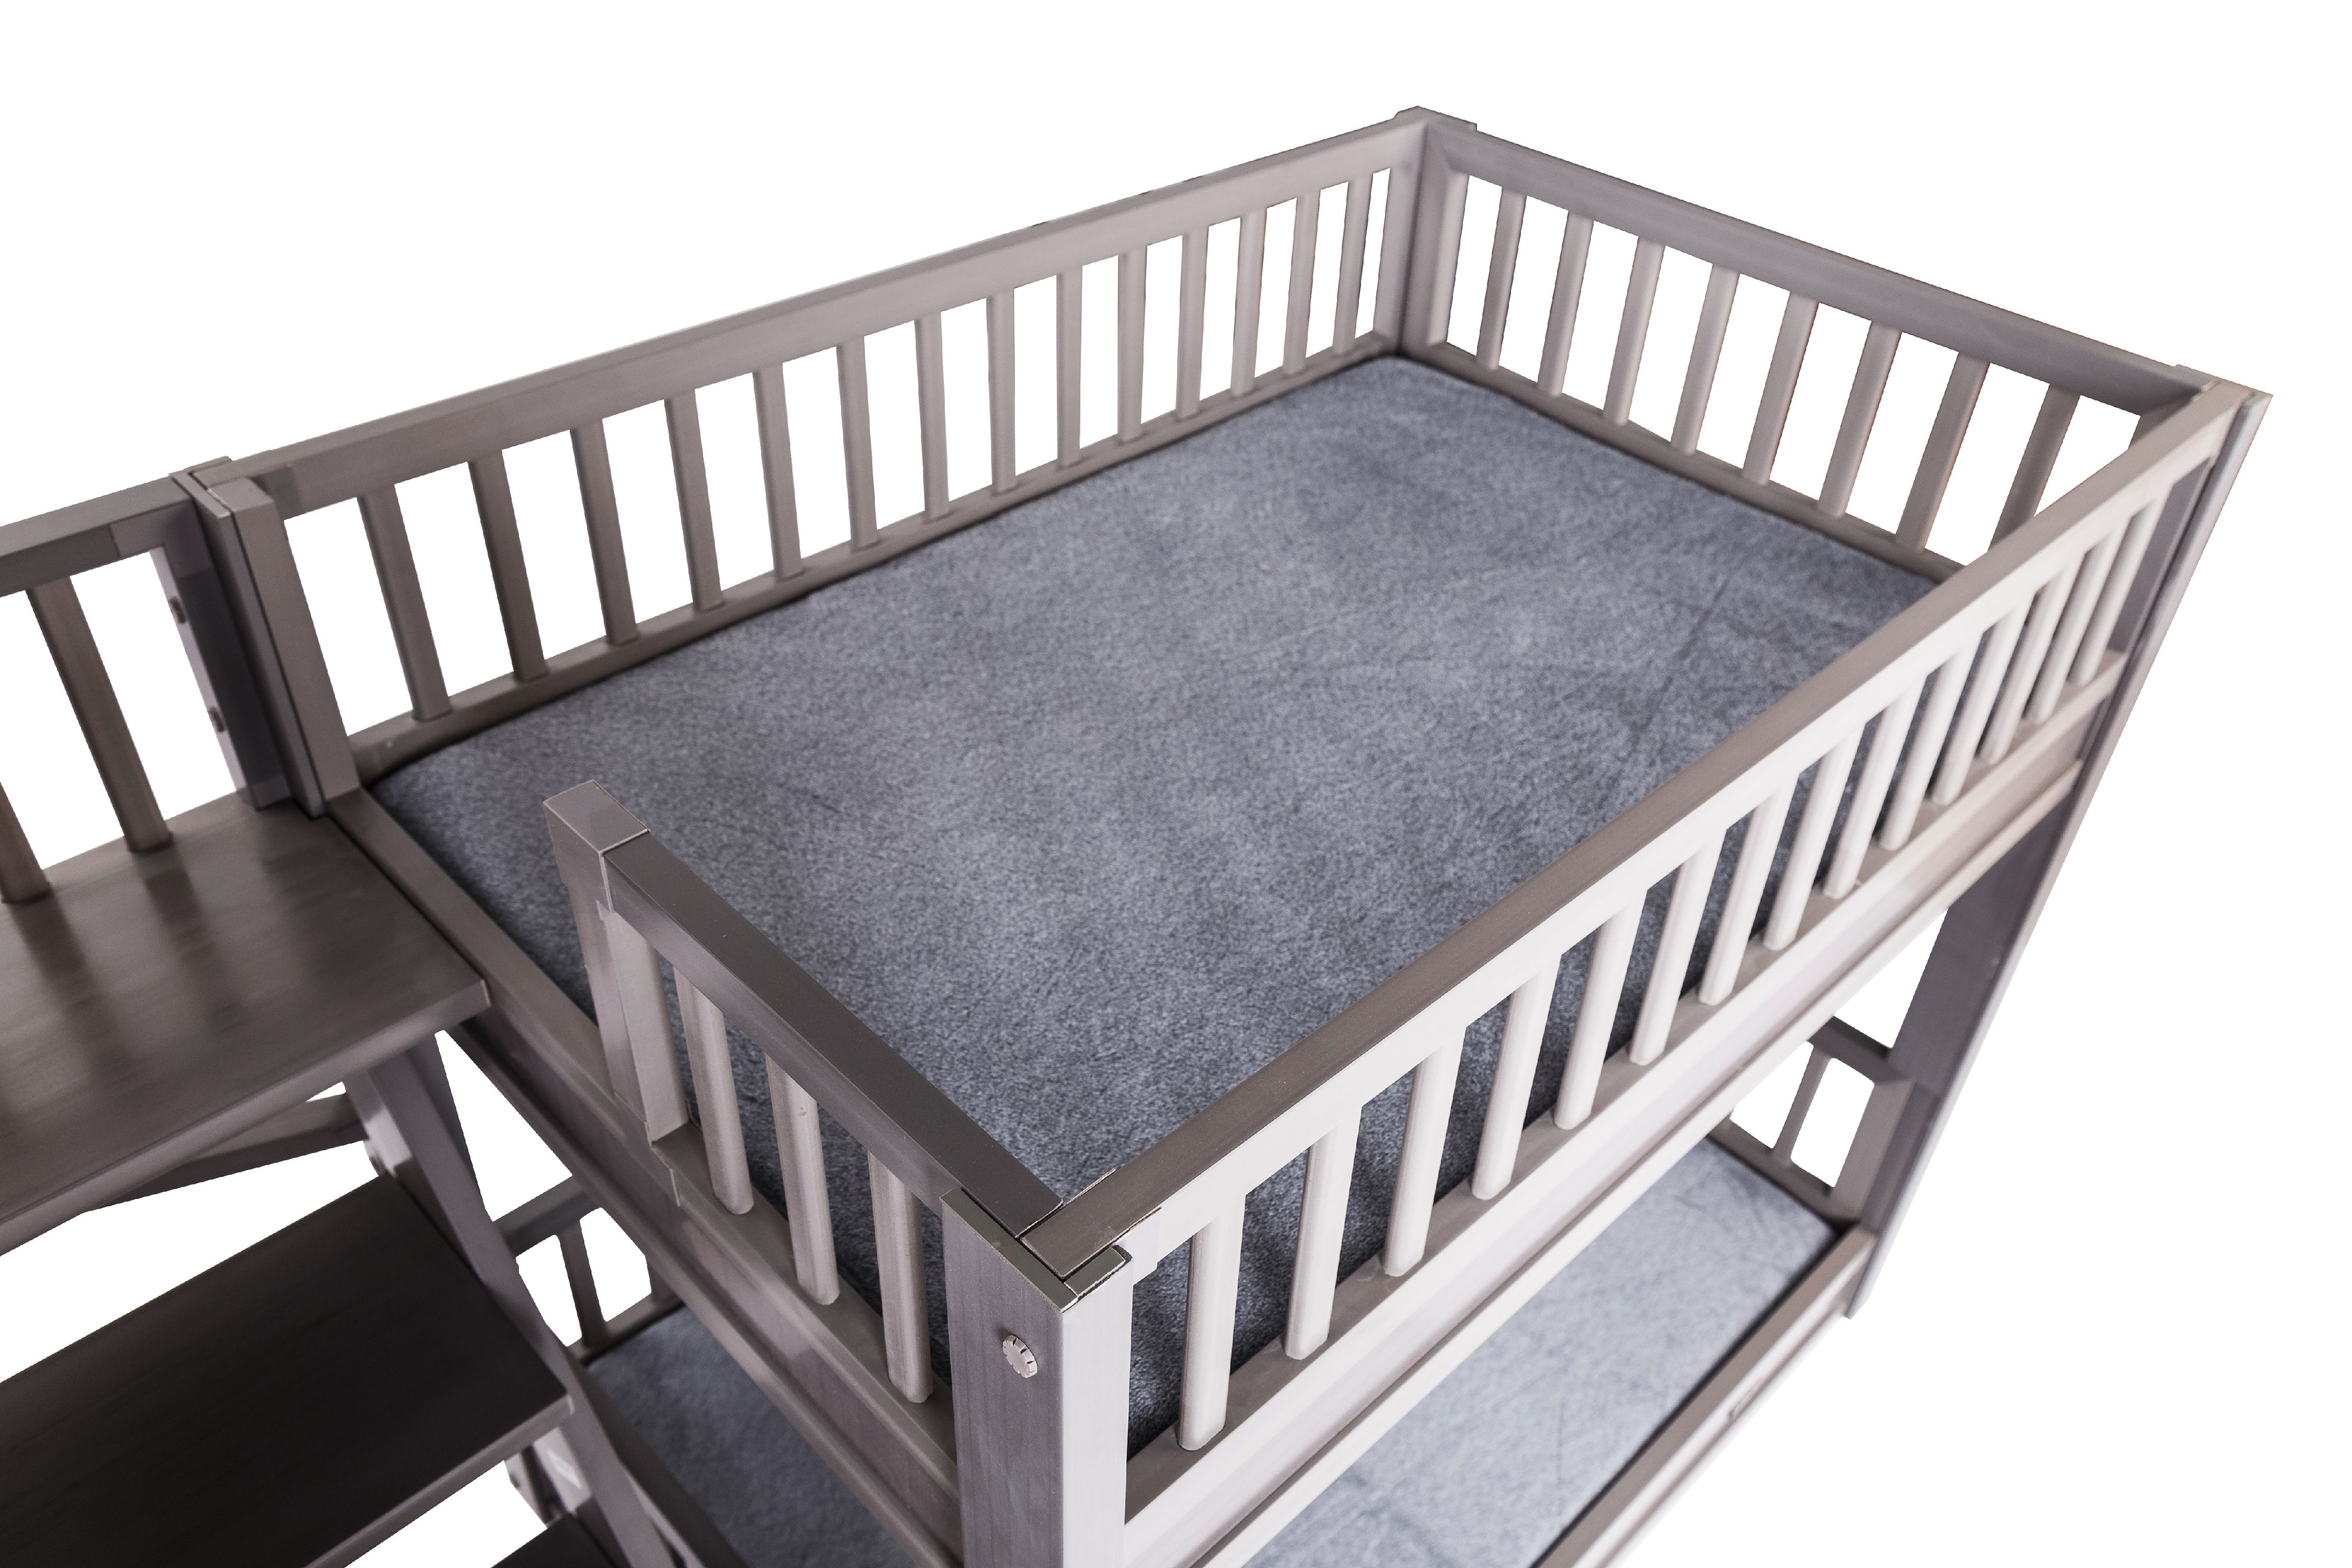 Ecoflex Dog Bunk Bed with Removable Cushions, Gray - image 2 of 10